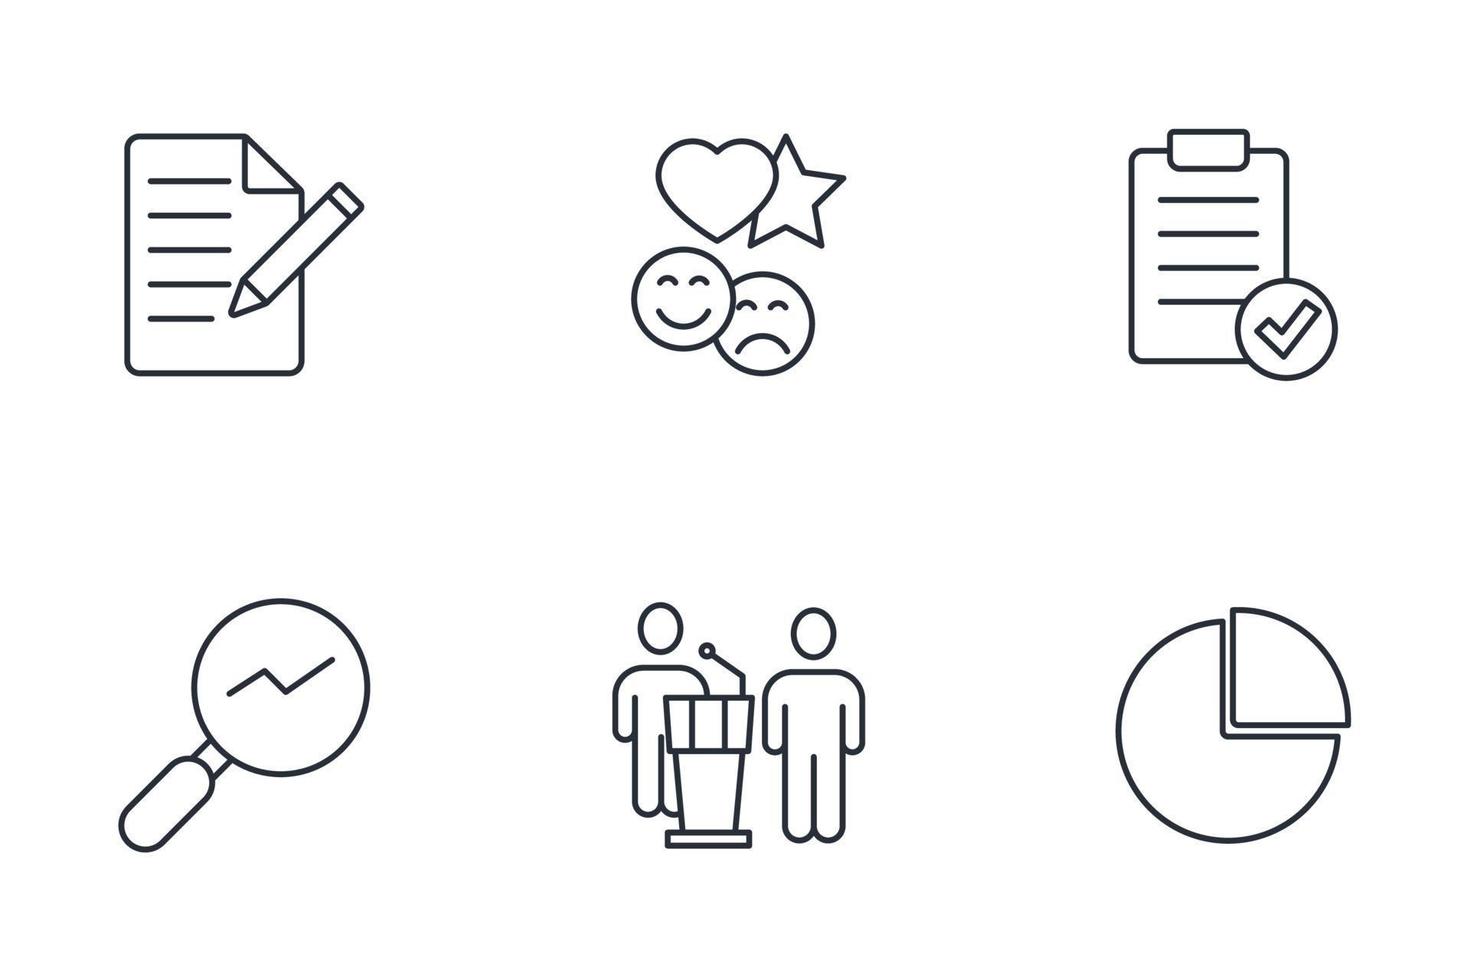 Customer satisfaction survey and questionnaire icons set . Customer satisfaction survey and questionnaire pack symbol vector elements for infographic web